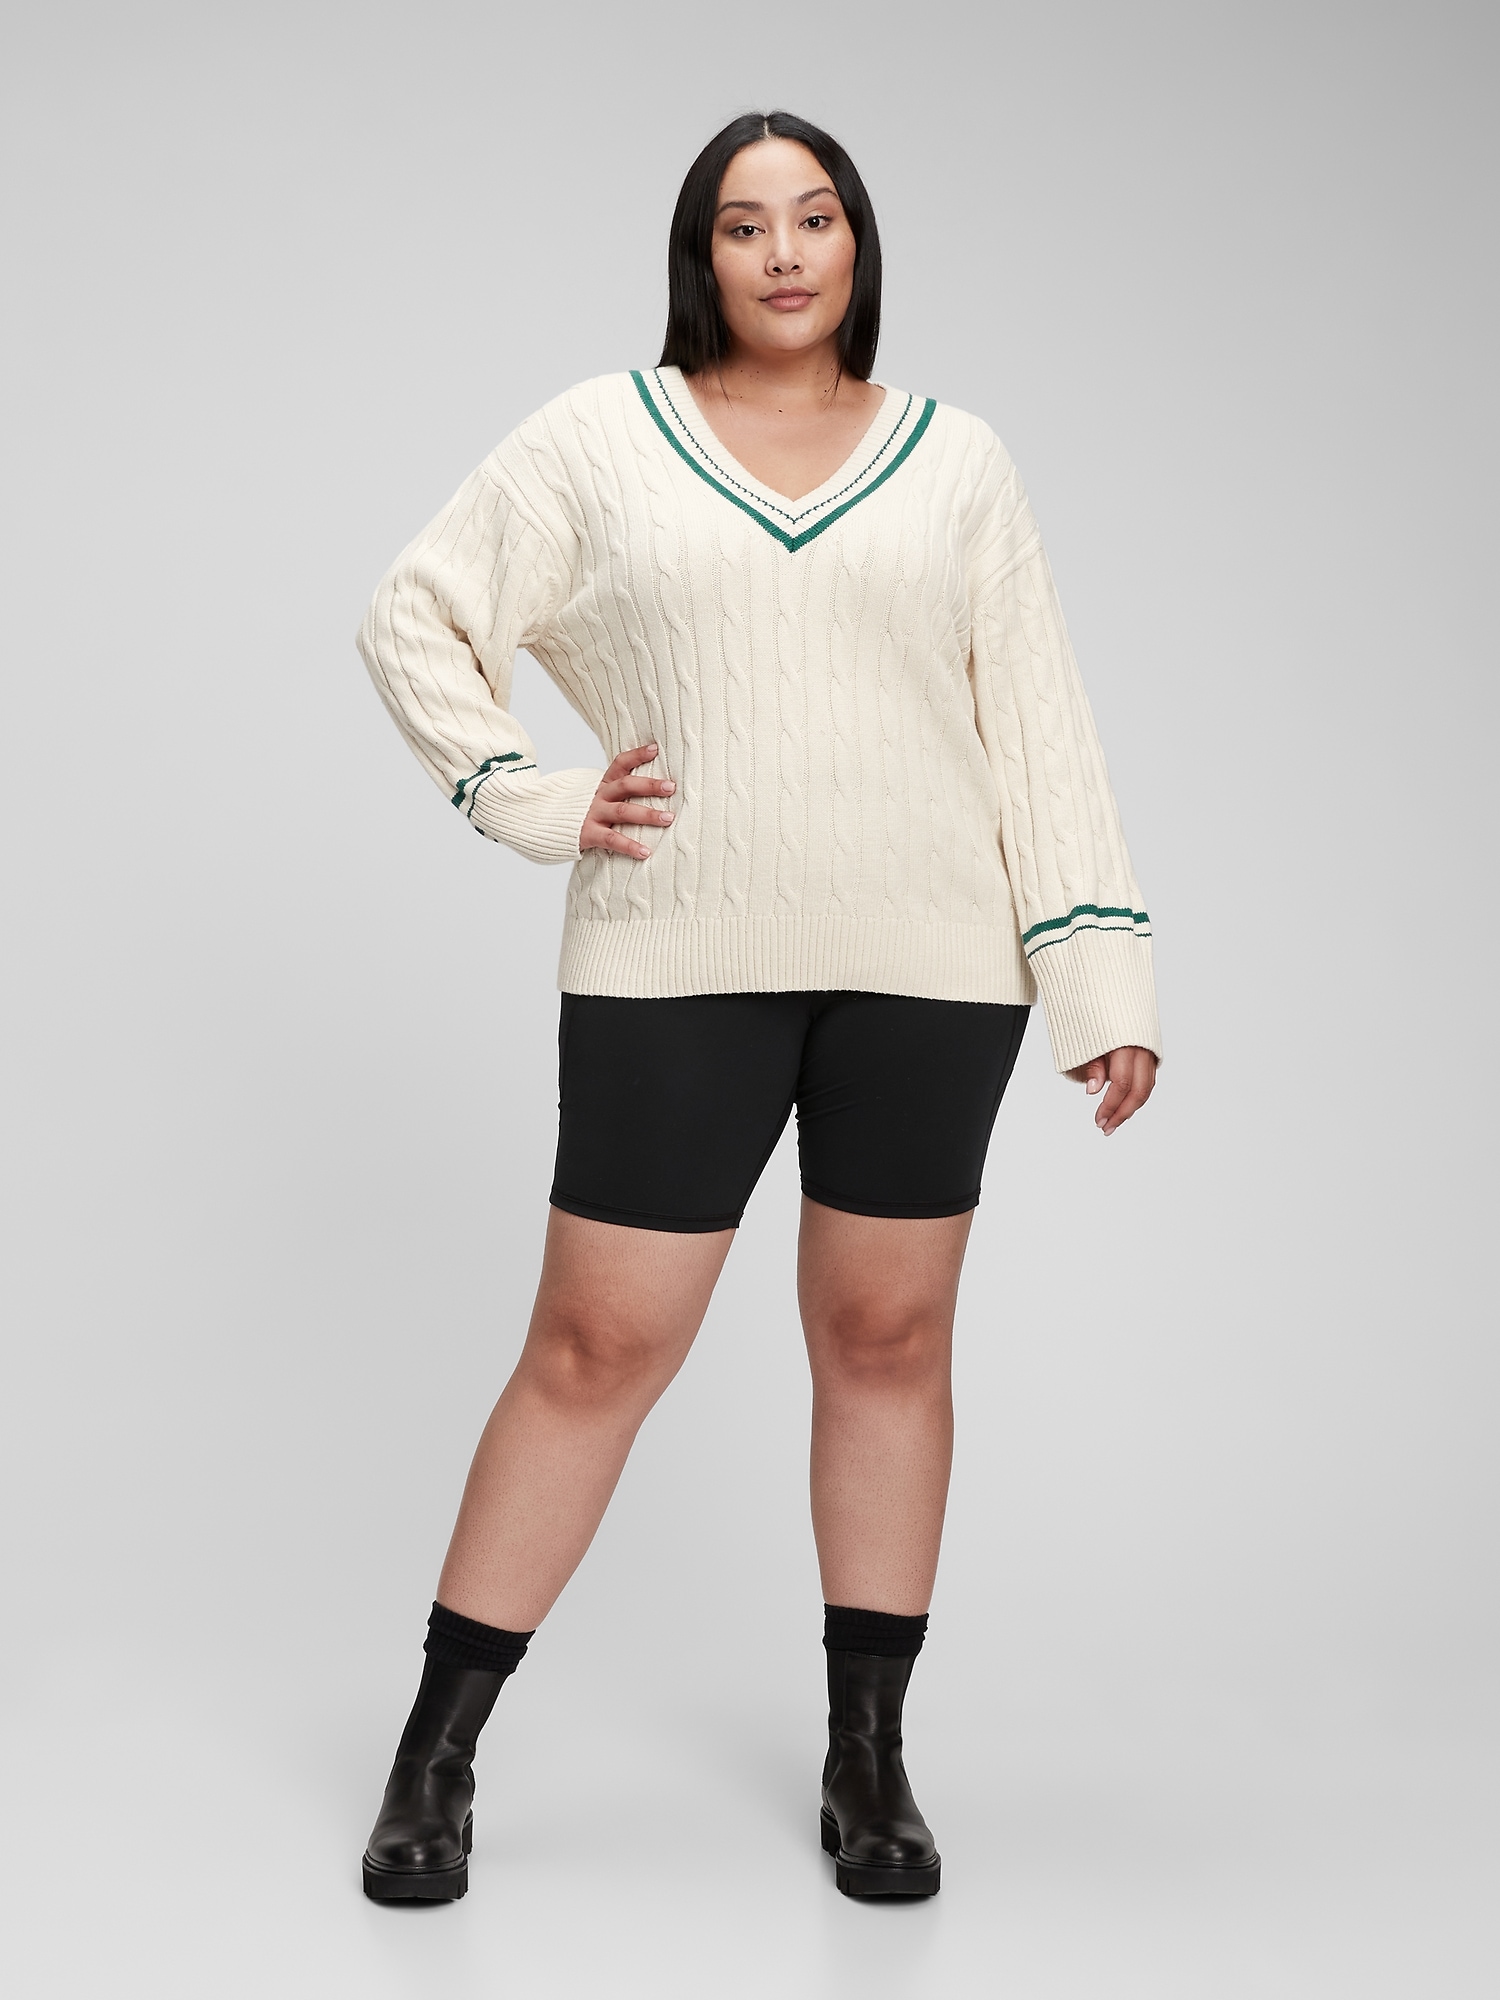 What to wear in winter if I'm fat: V neck sweaters for plus size women